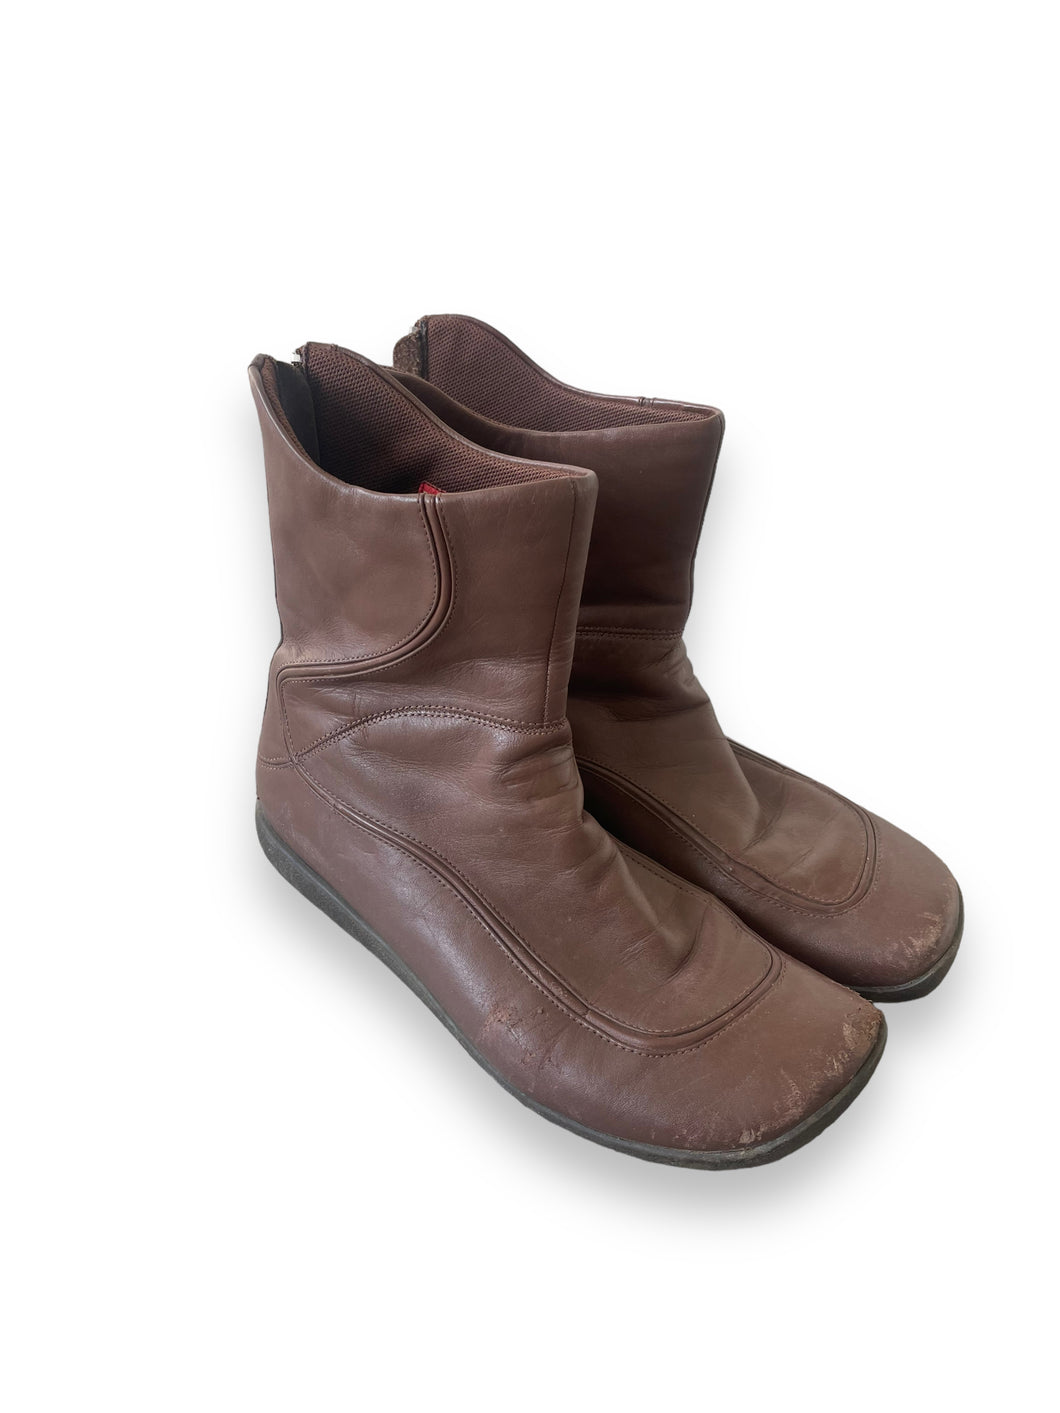 Diesel Leather Camel Boots (37)